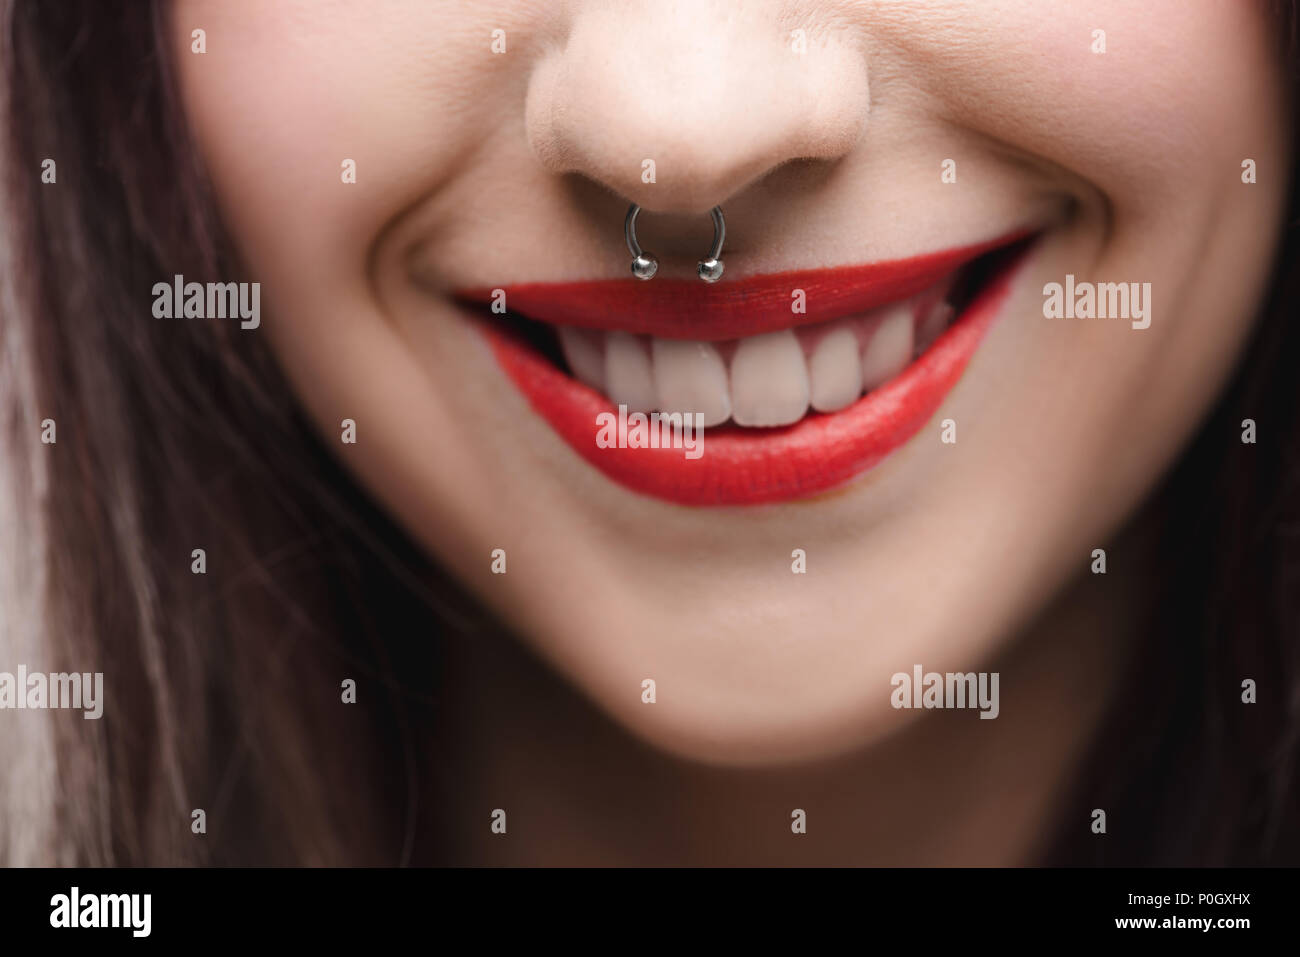 close up view of young girl with red lips and piercing in nose Stock Photo